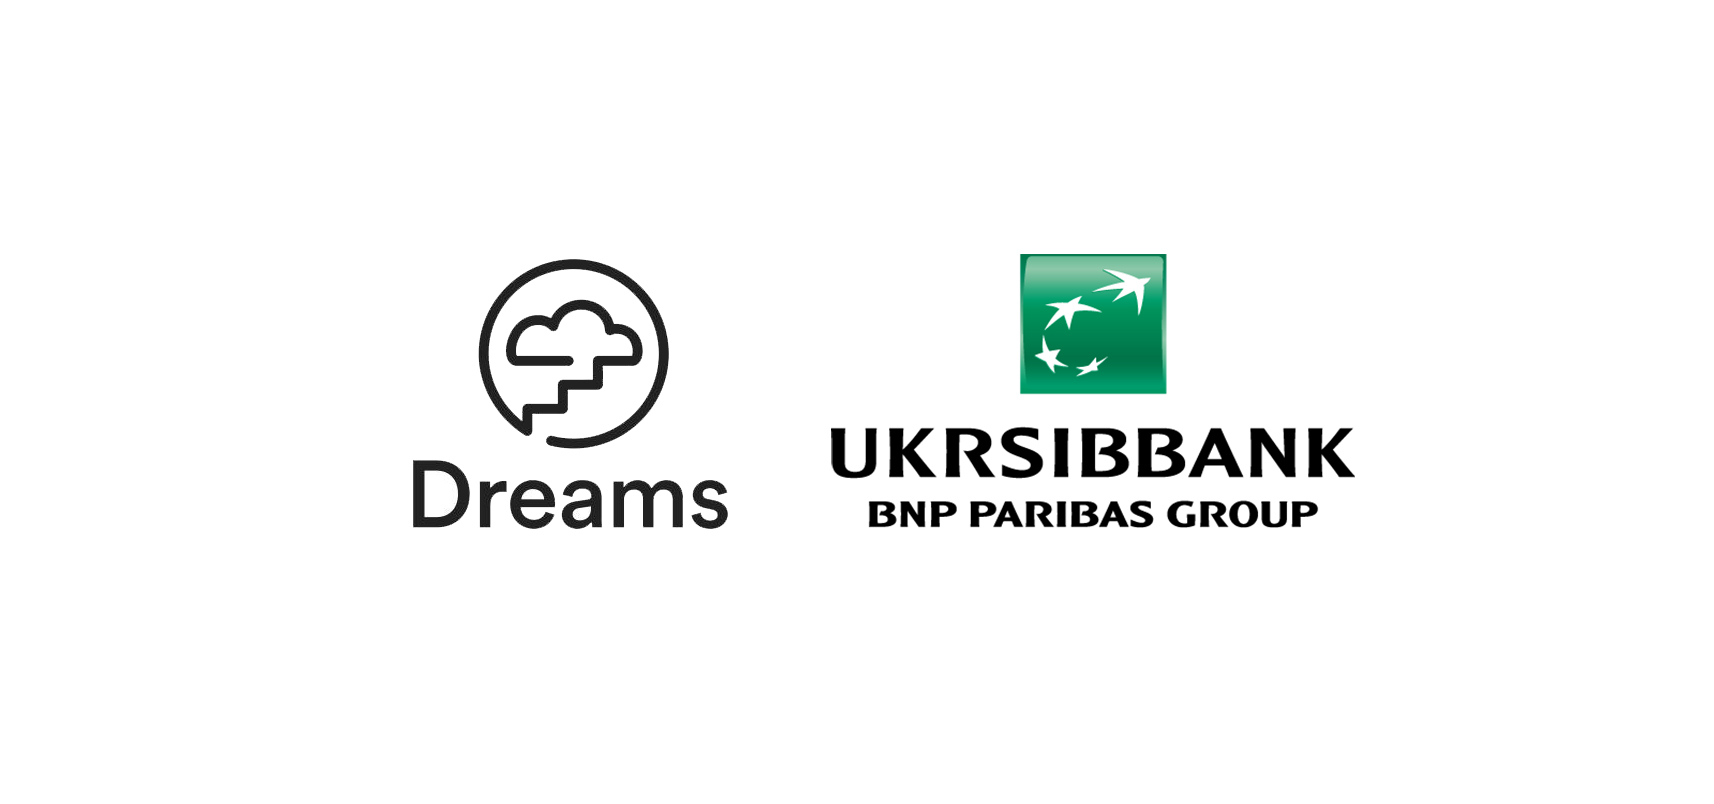 UKRSIBBANK Announces a Strategic Partnership with Swedish Dreams to Enhance the Digital User Experience in Ukraine